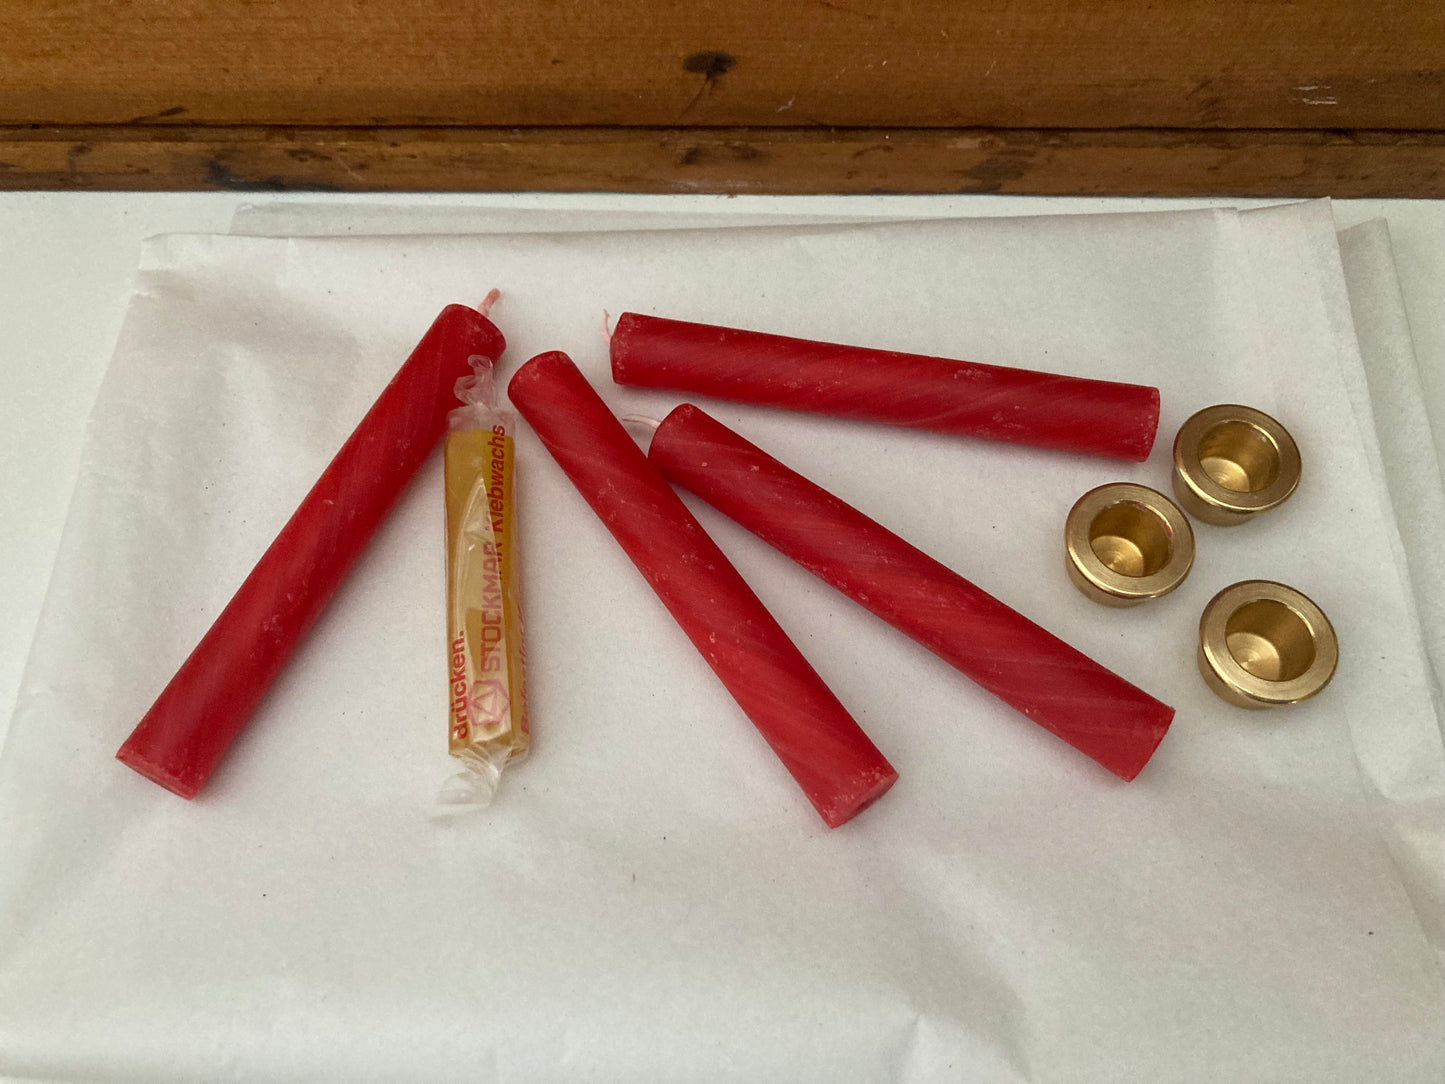 Beeswax Candles - Small RED CANDLES,  4 candles and Sticky Wax (10cm/4 inches)